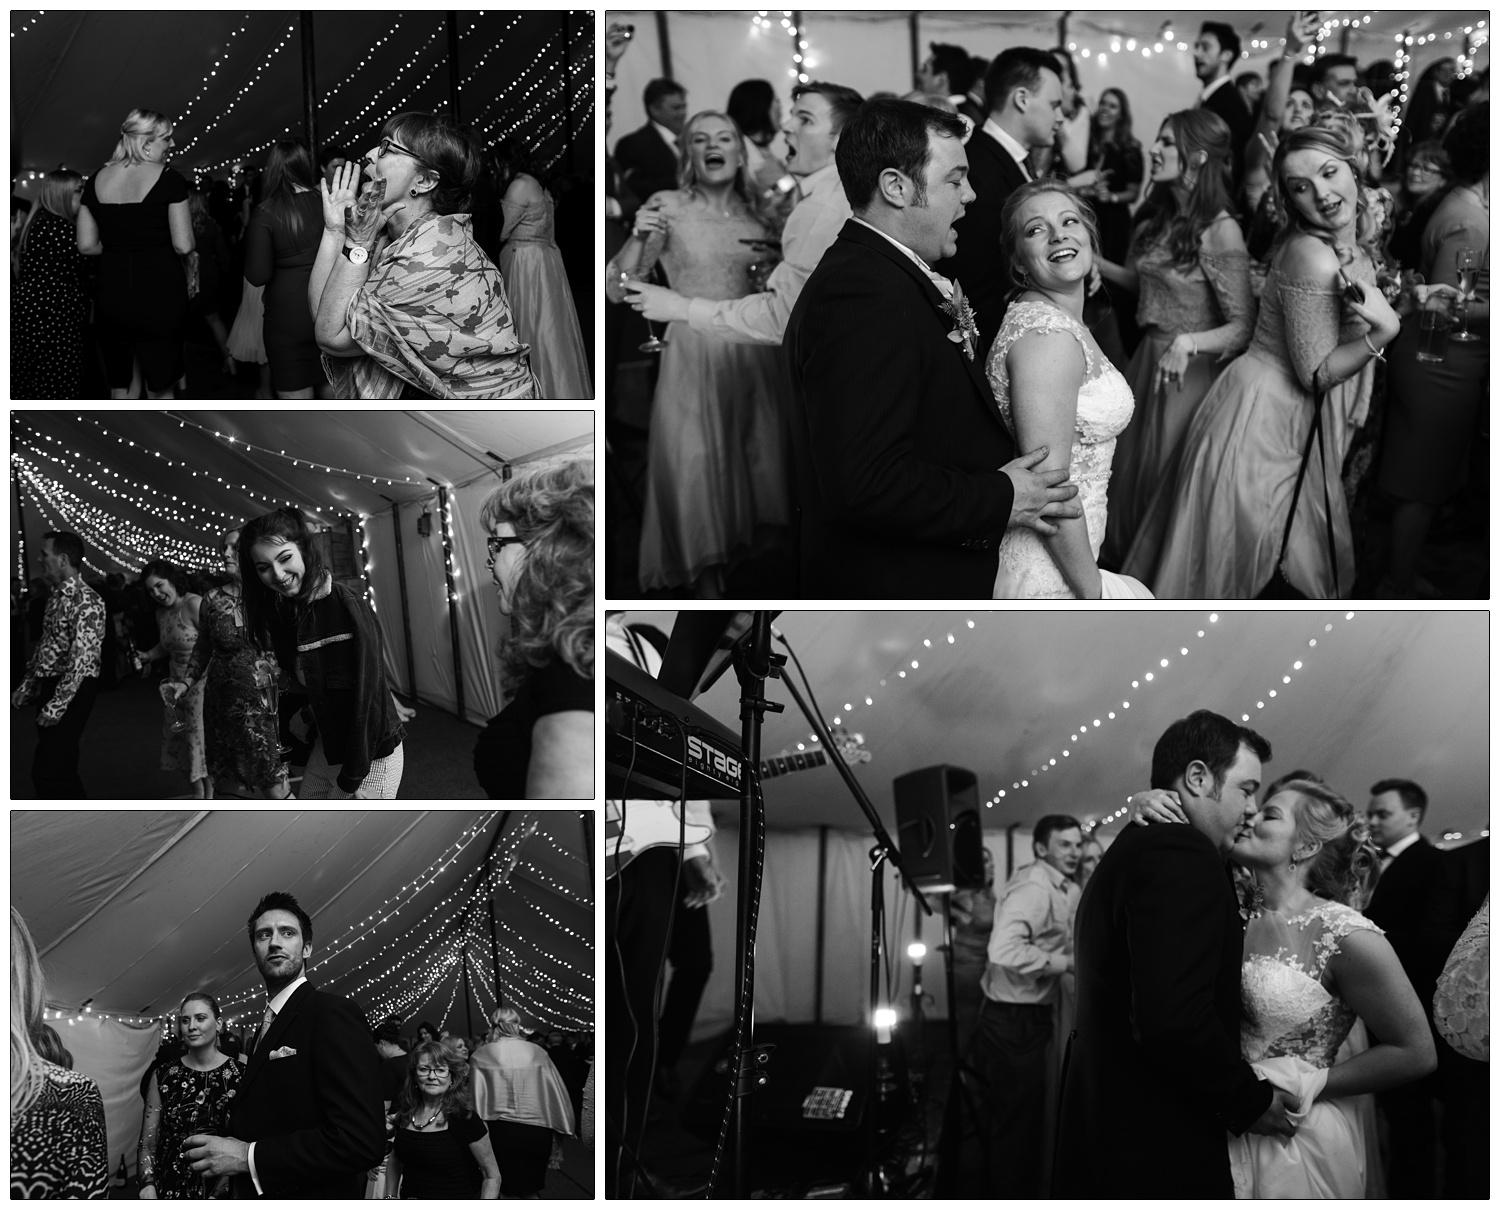 Black and white photographs of a wedding reception. The bride and groom are dancing together surrounded by friends.